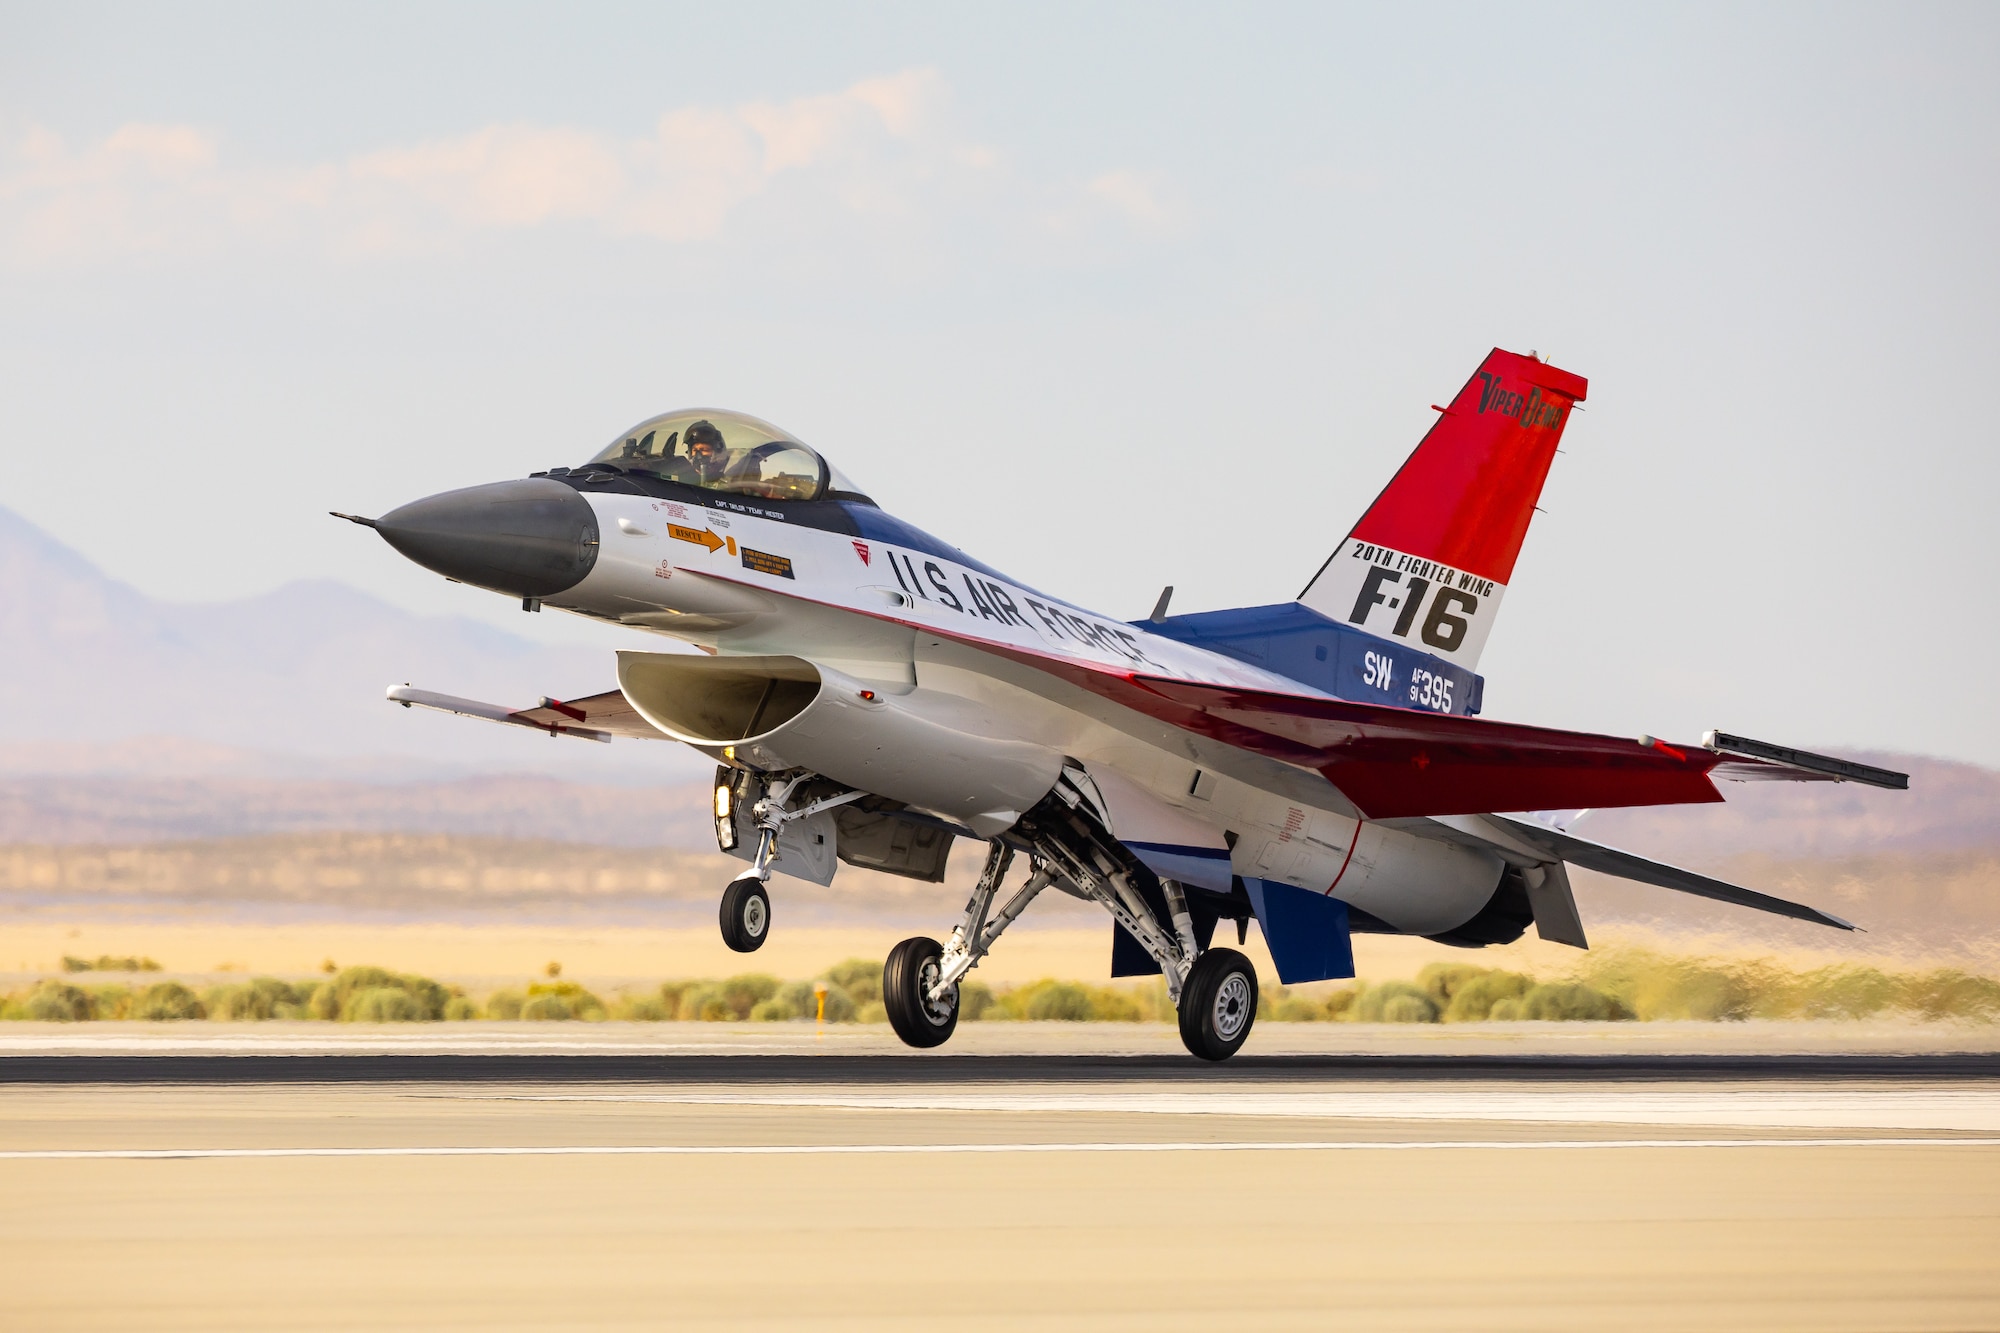 The 412th Maintenance Group, Fabrication Flight - Corrosion Control Team recently repainted the F-16 Viper Demo Team aircraft in the classic YF-16 livery to commemorate the platform's first flight 50 years ago at Edwards Air Force Base, California. (Air Force photo by Nicohlas Cholula)